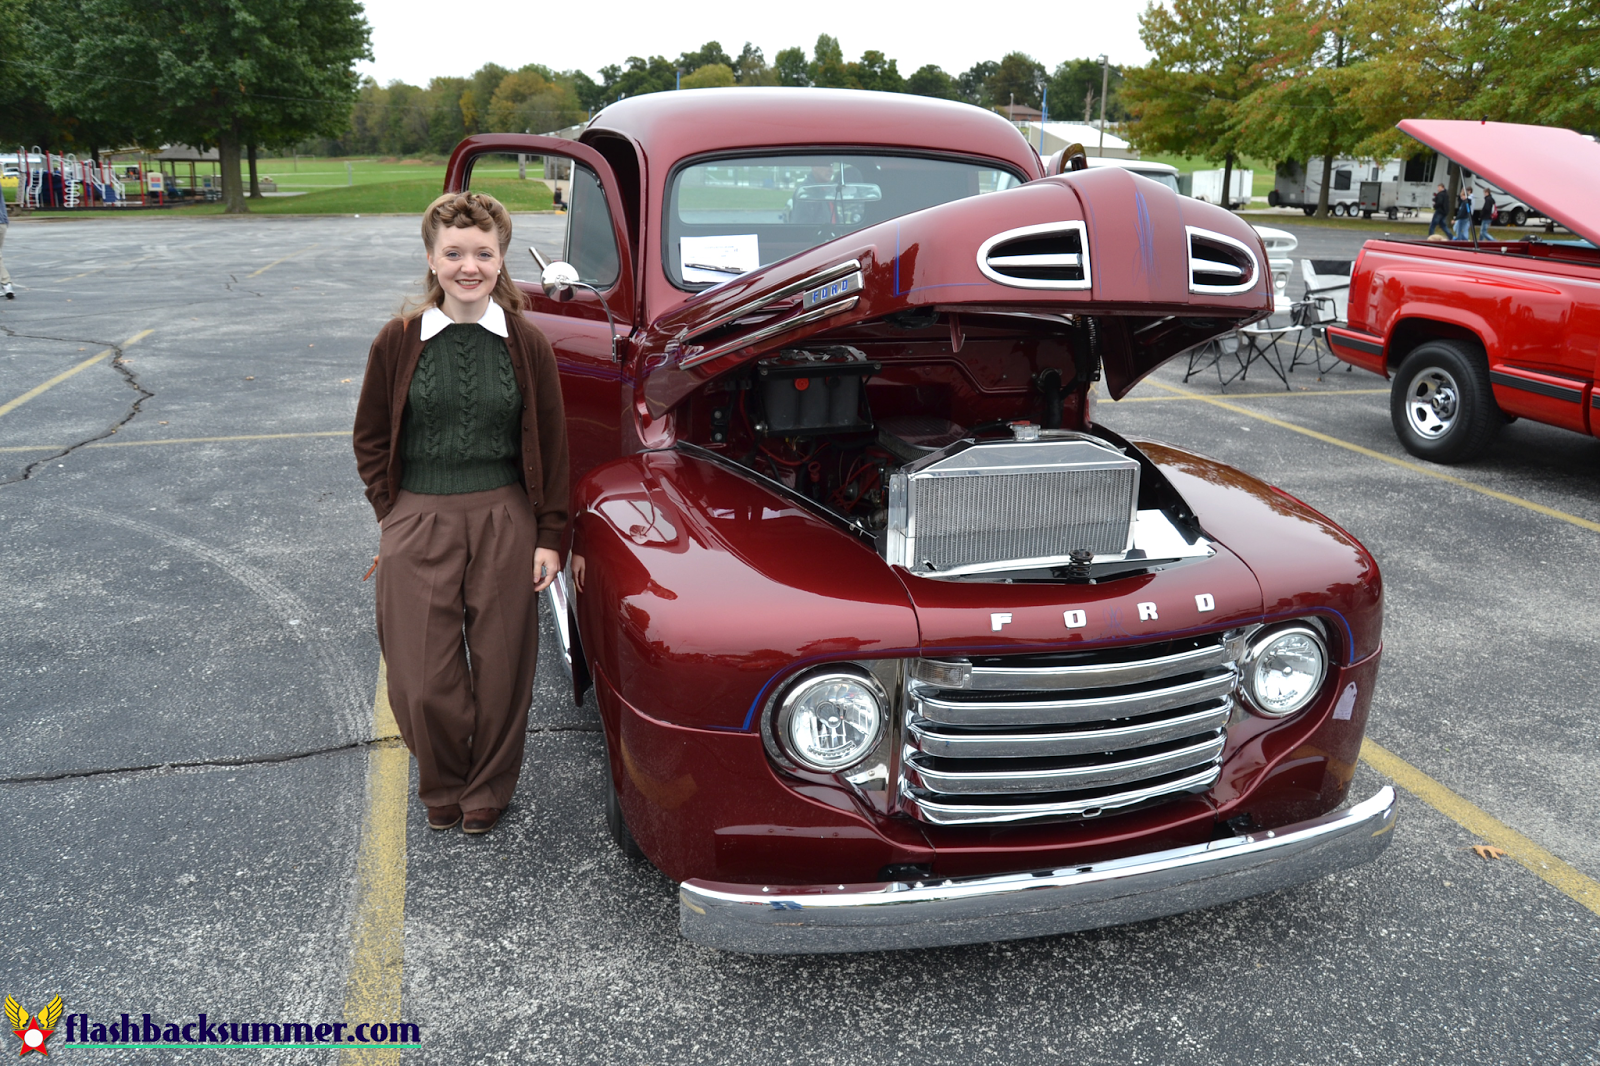 Flashback Summer: Apple Butter Makin' Days and 1940s Sweater Details - classic pickup truck